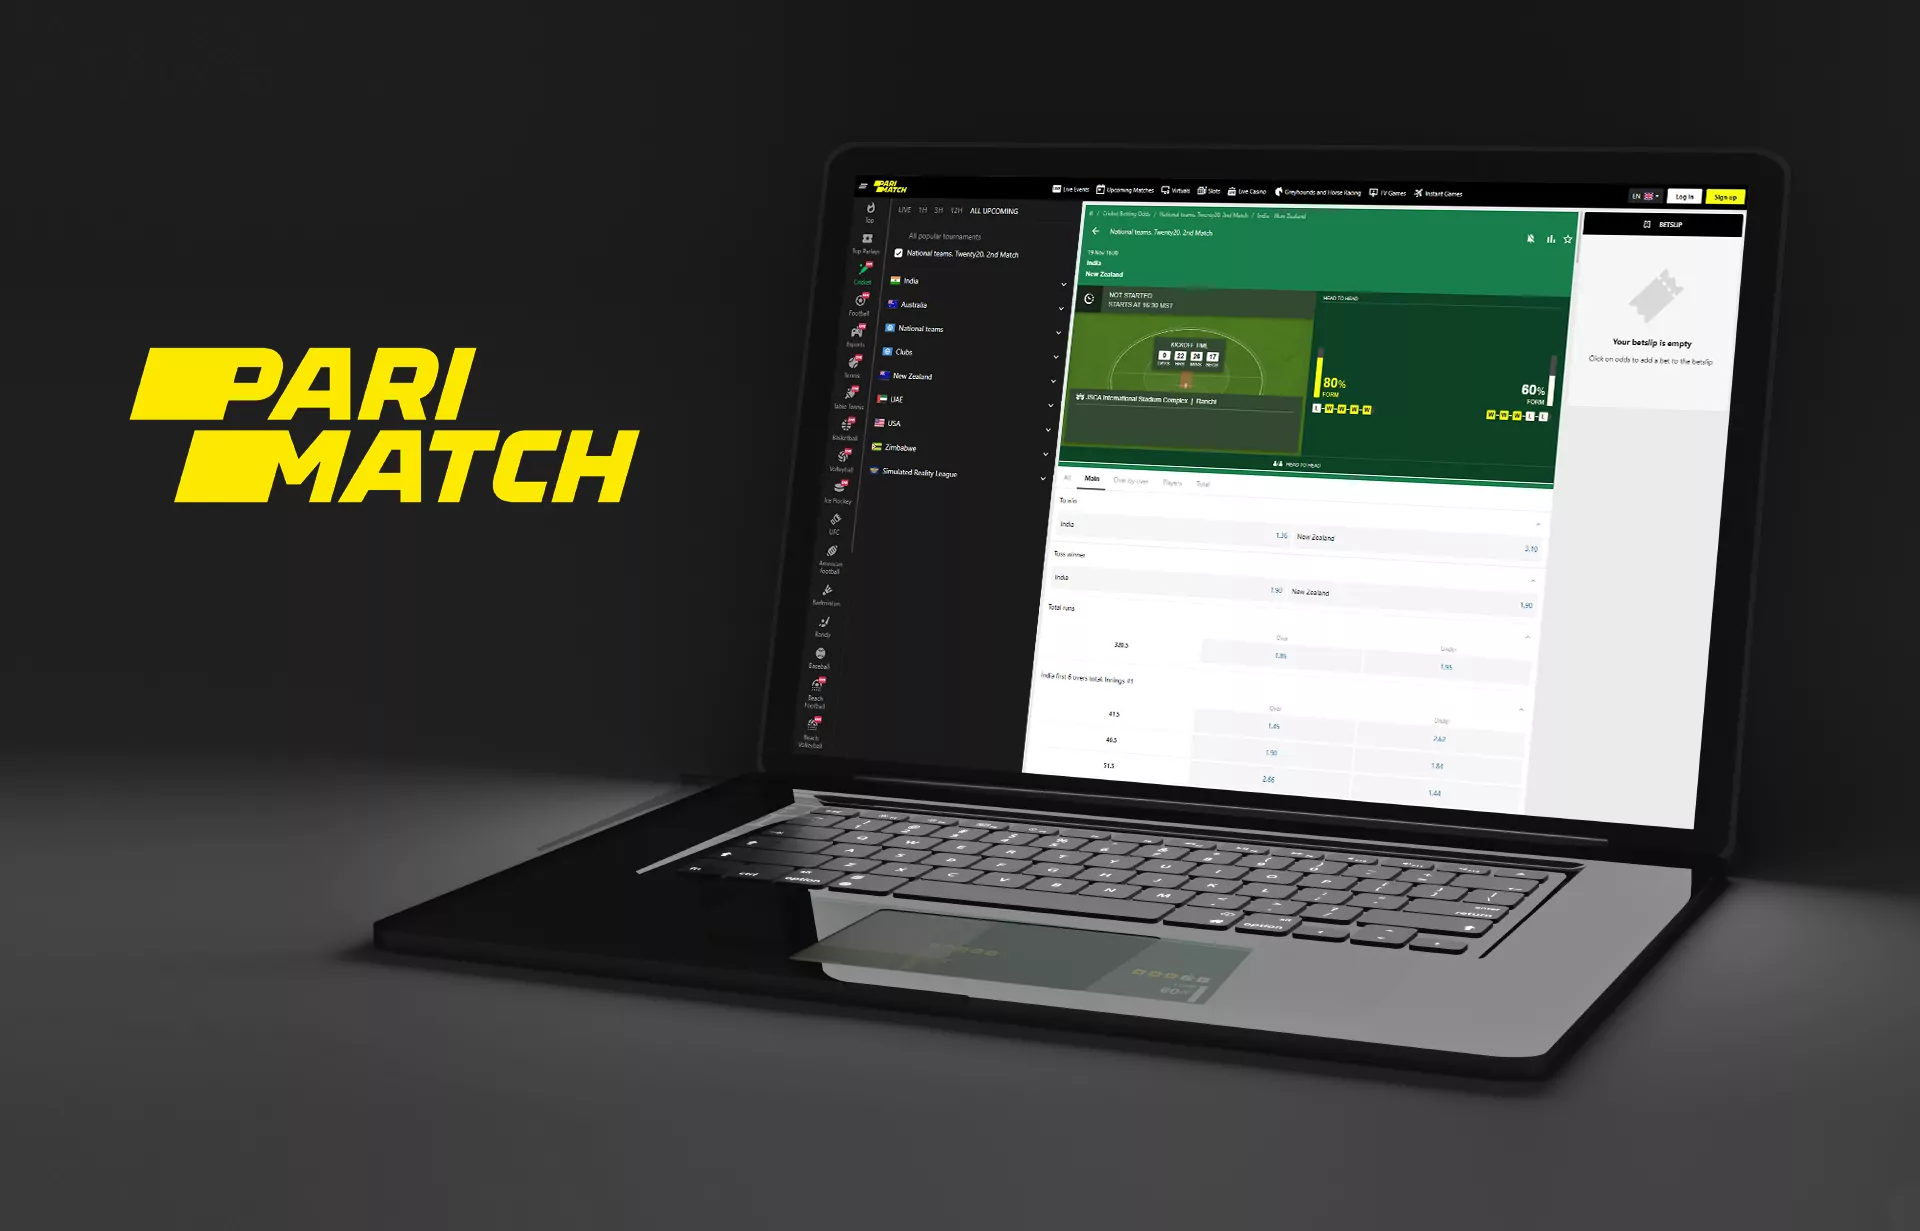 Parimatch is a worldwide safest bookmaker taking a leadership position in the betting sphere.